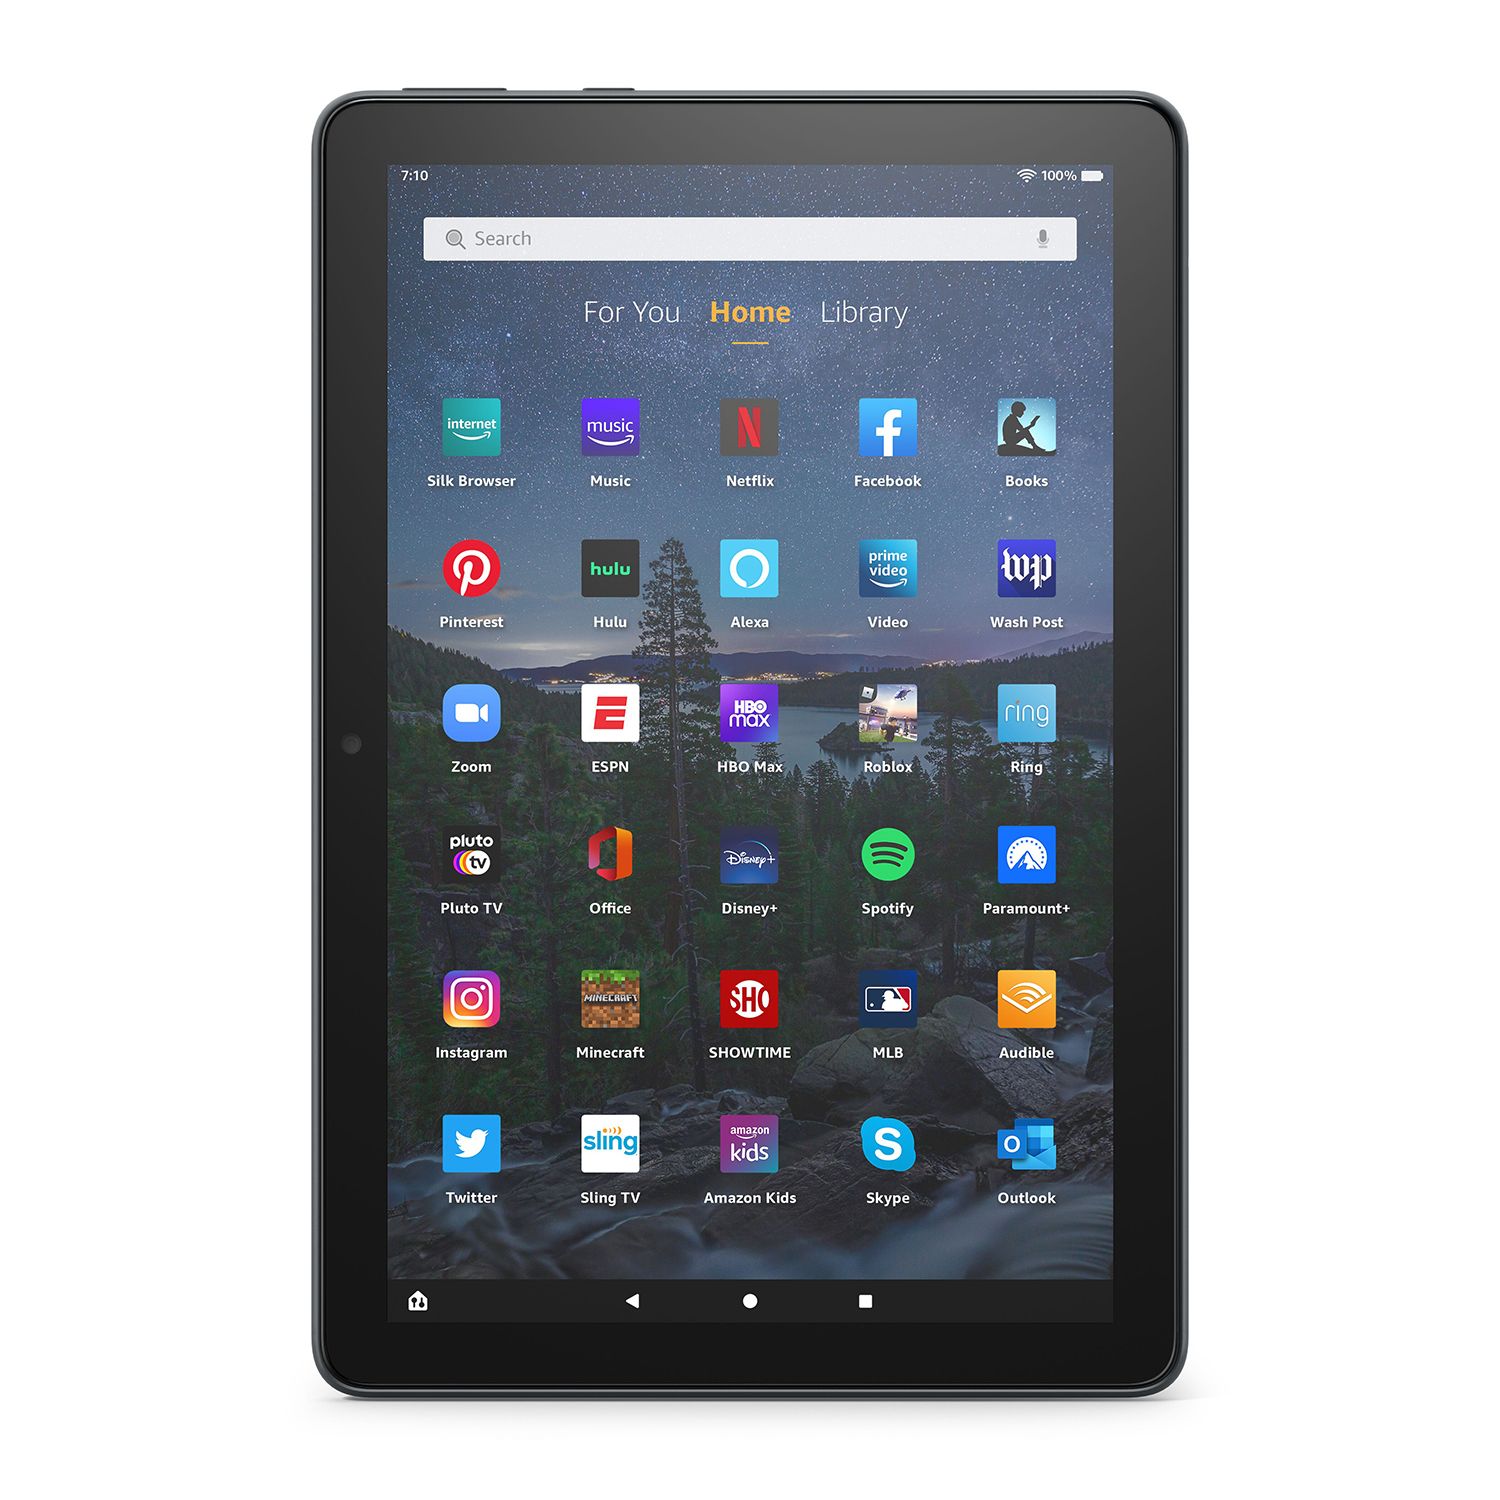 Amazon Introducing Fire HD 10 Plus Tablet - 64GB with 10.1-in. Display